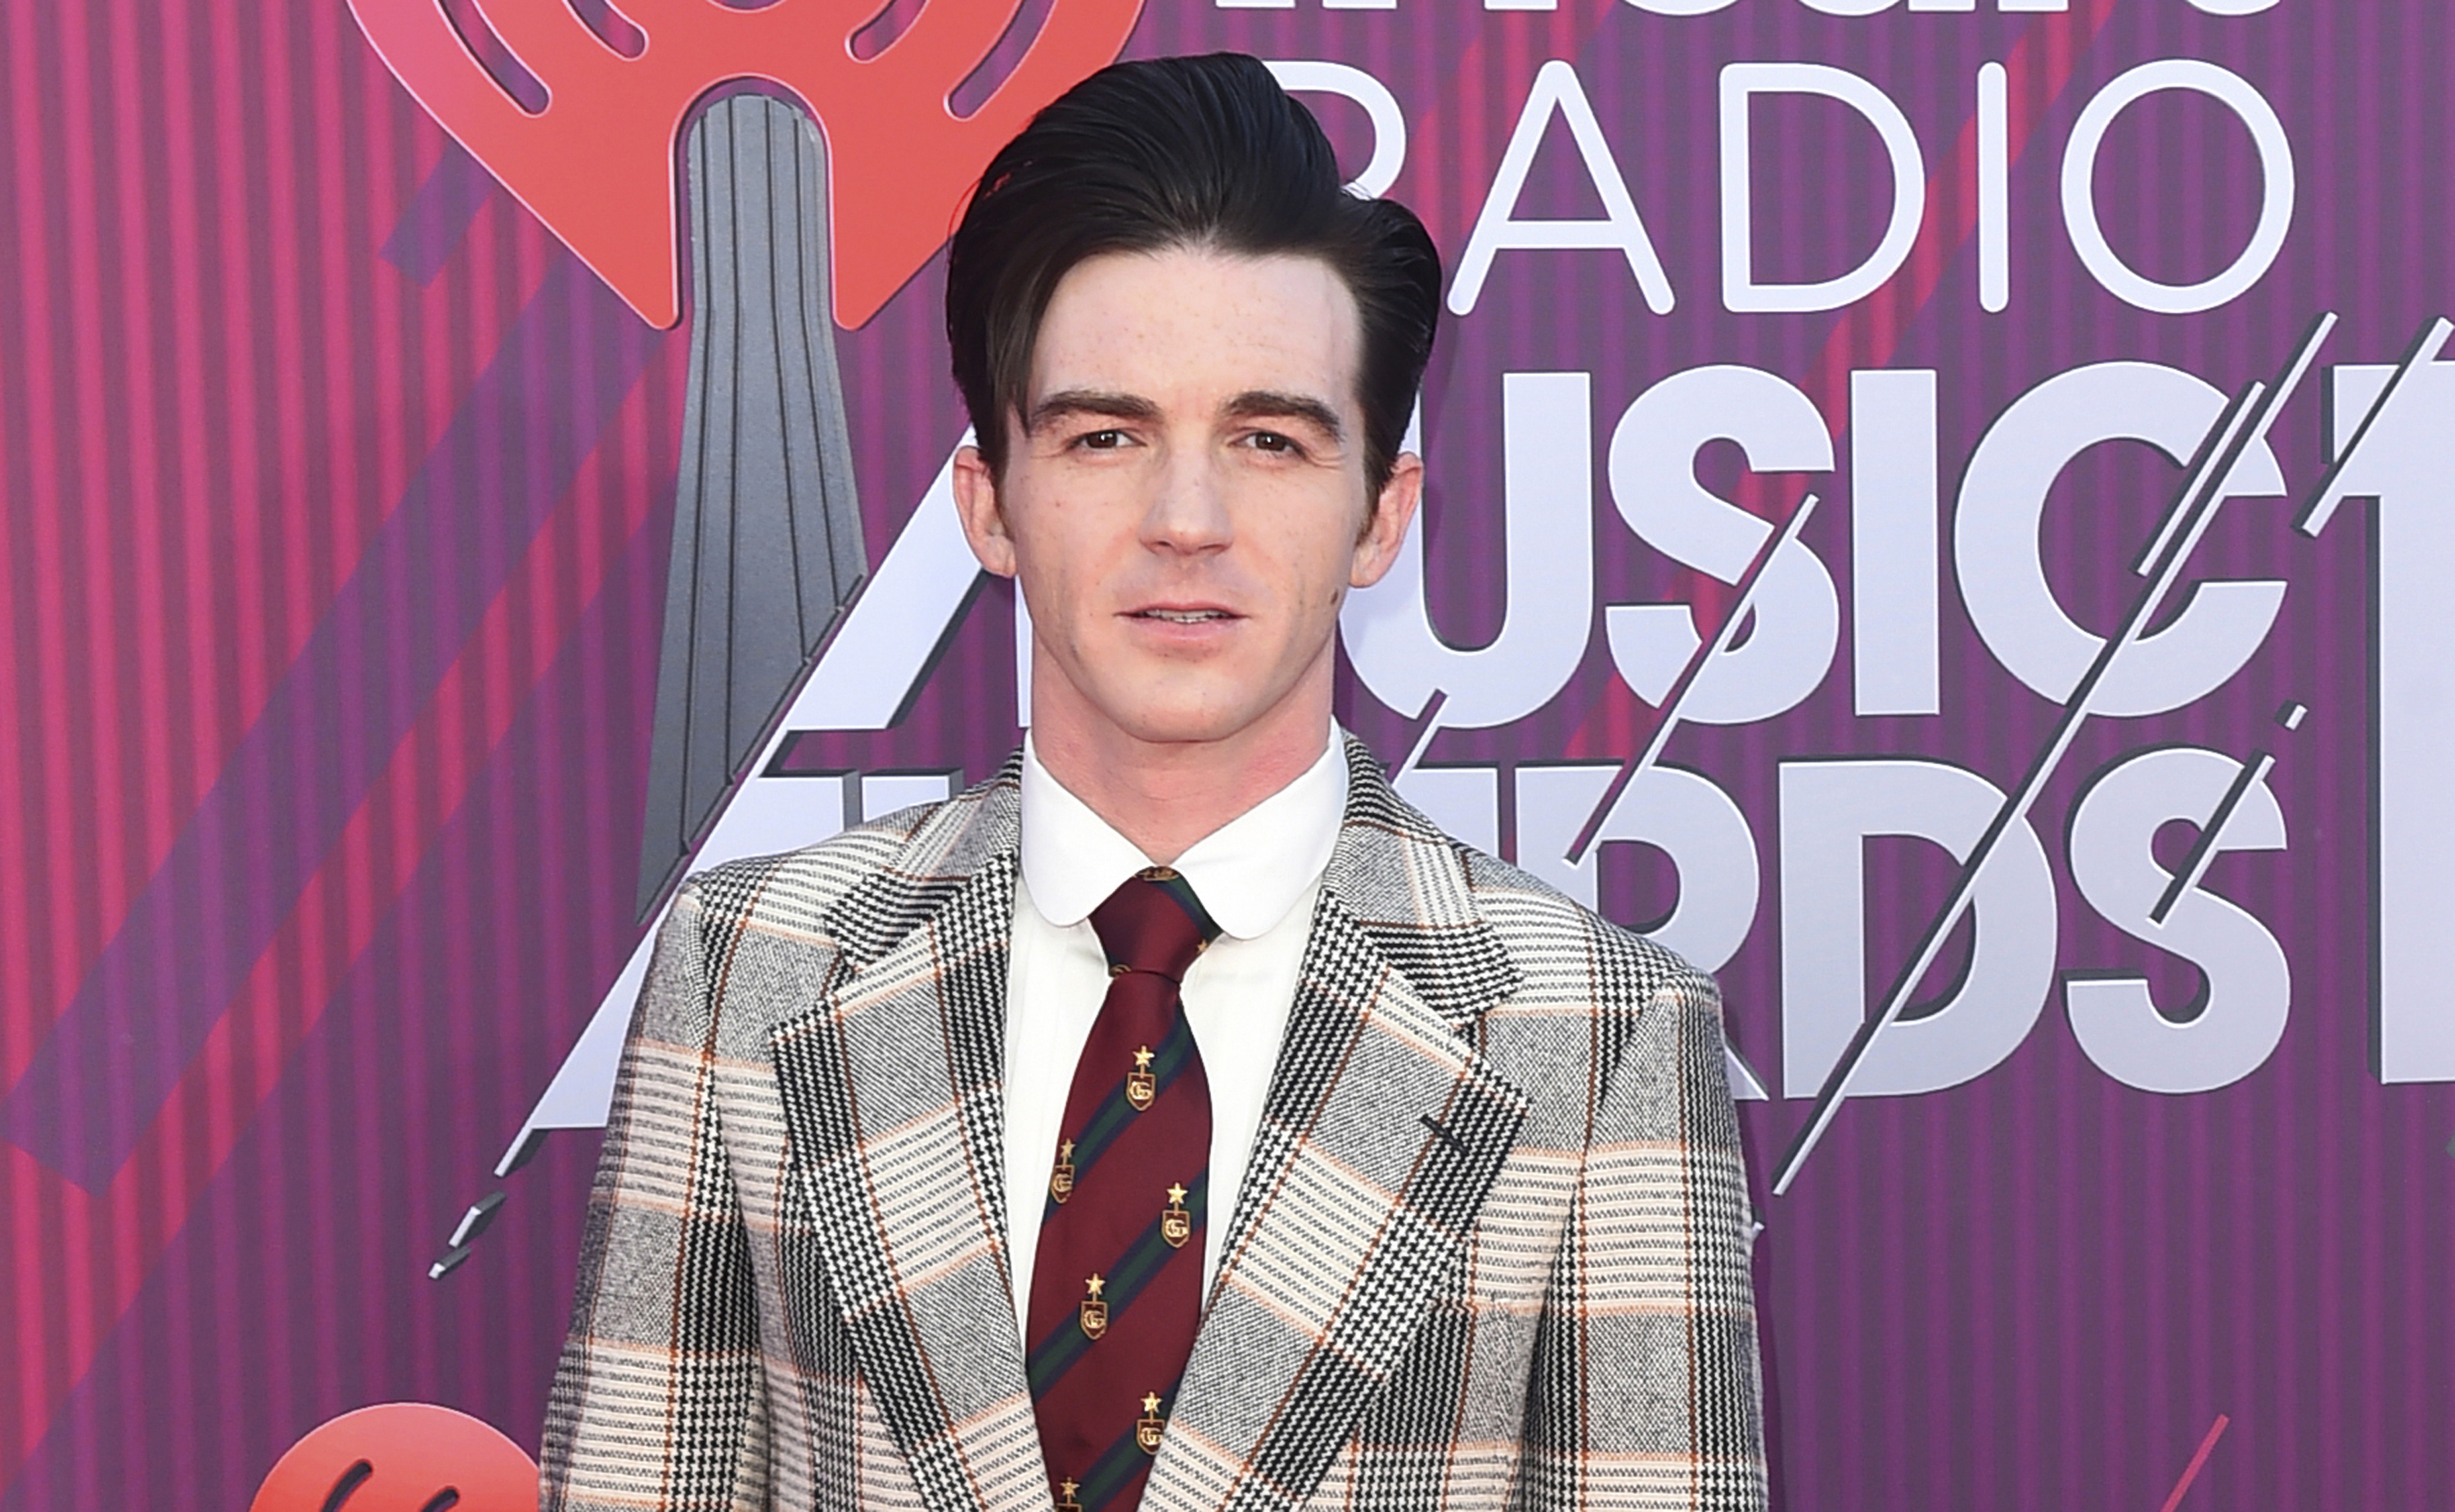 Drake Bell Pleads Guilty To Endangering Children Charge